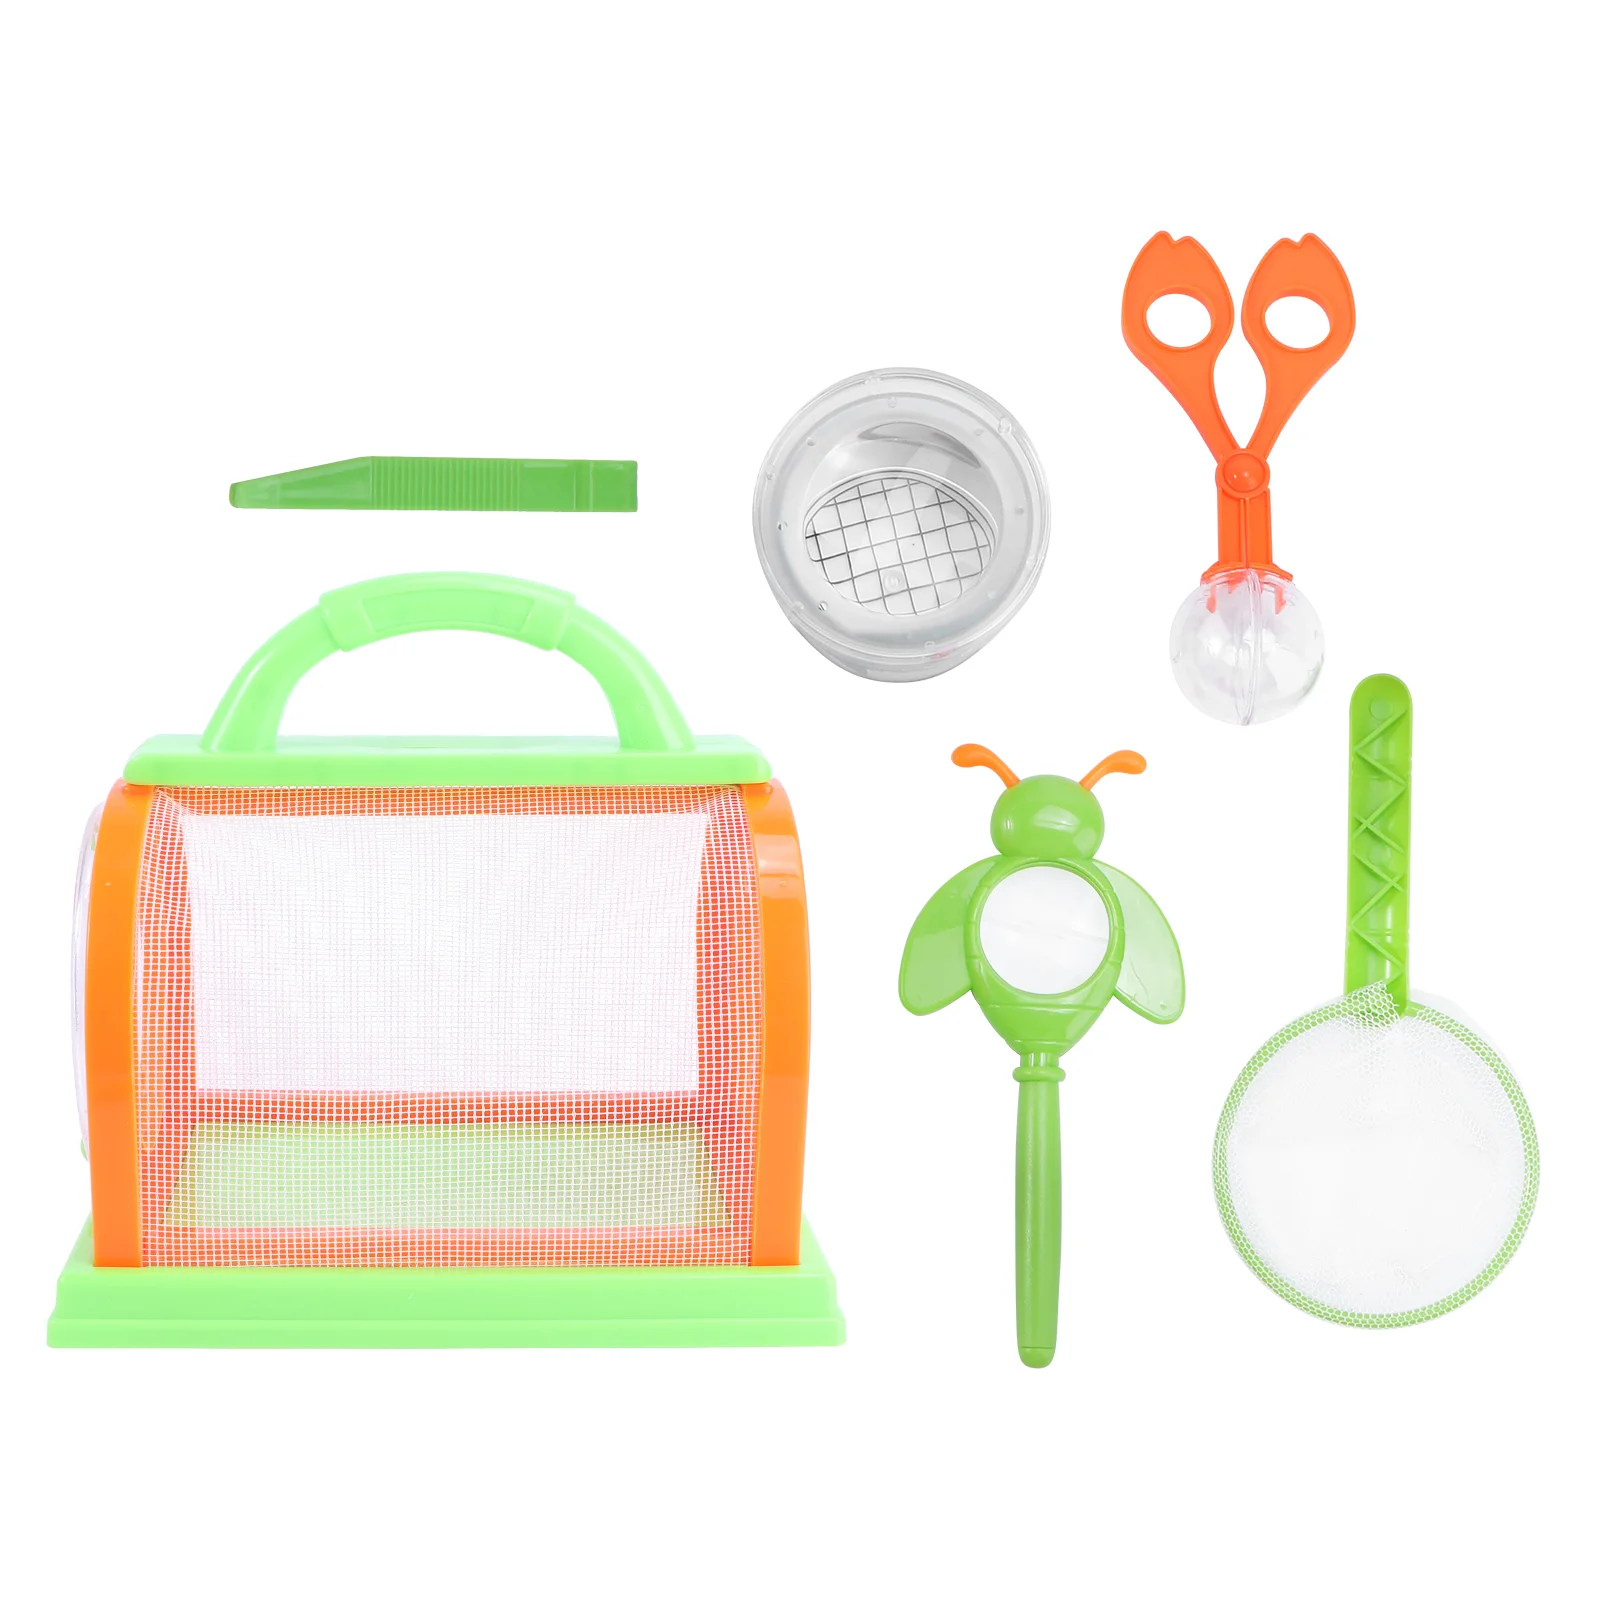 

Bug Kit Insect Catcher Toy Box Critter Observation Exploration Science Catching Kids Setcontainer Outdoor Collection Case Nature